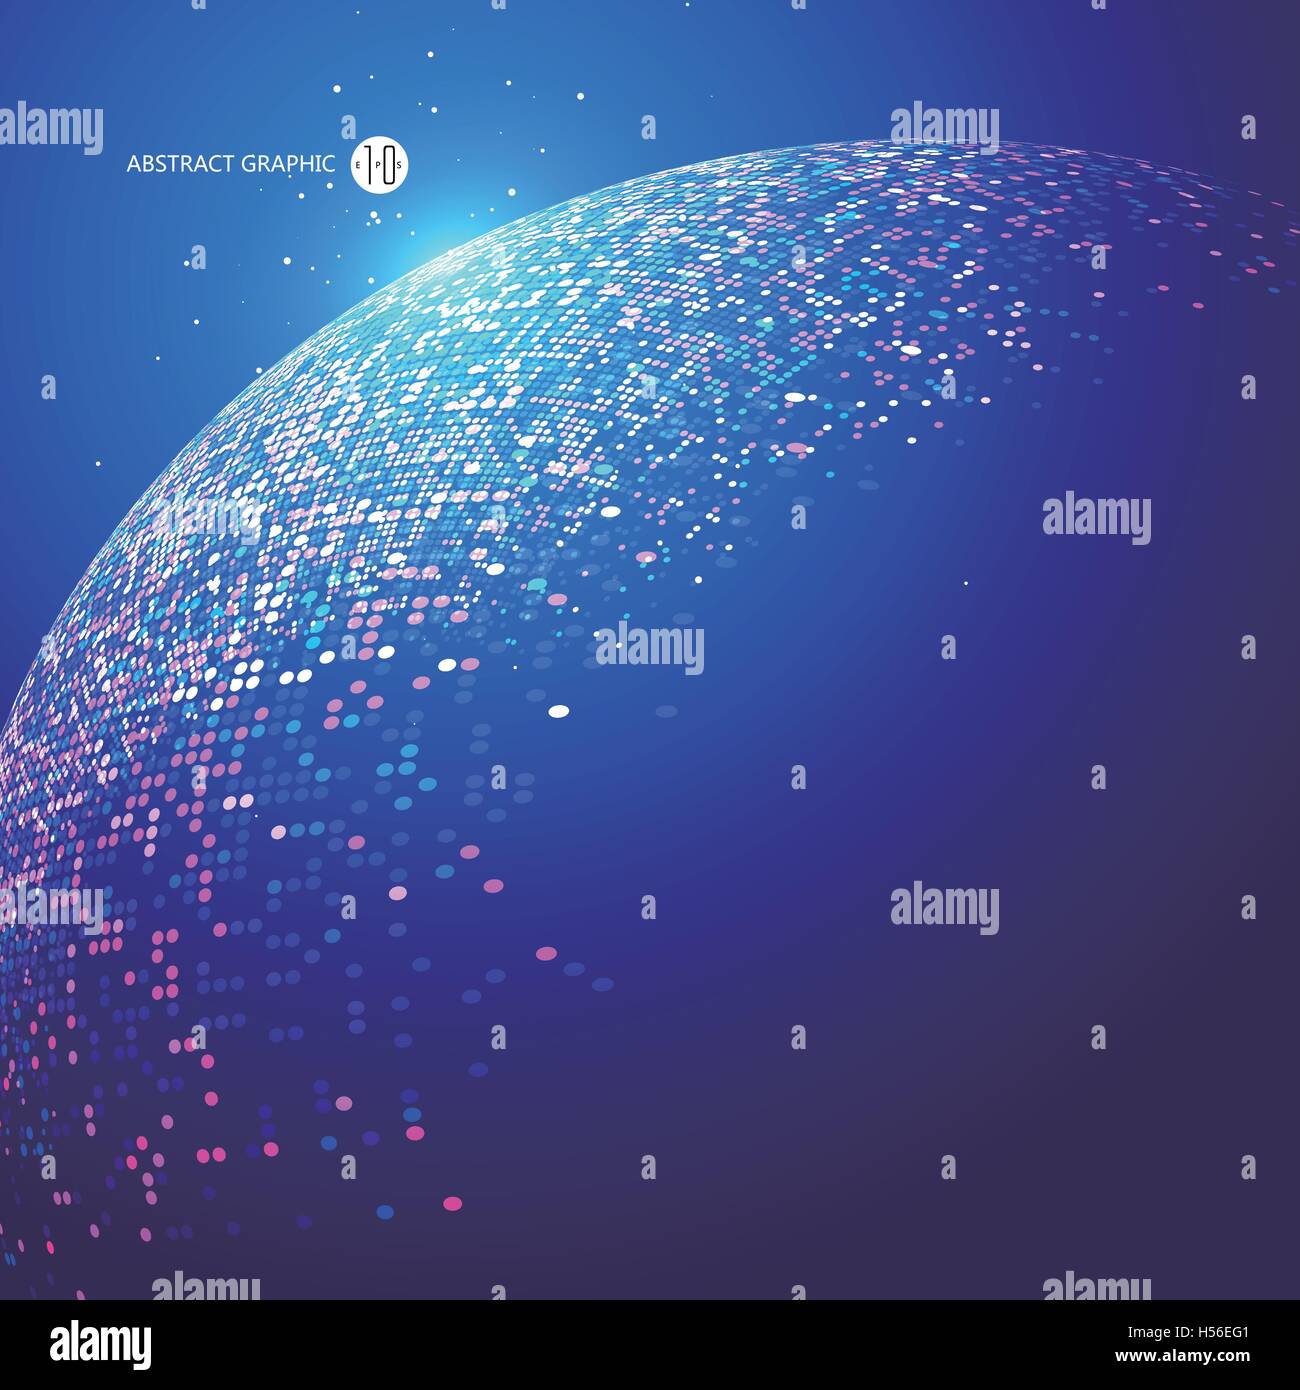 Colorful dots abstract sphere, science and technology vector illustration. Stock Vector